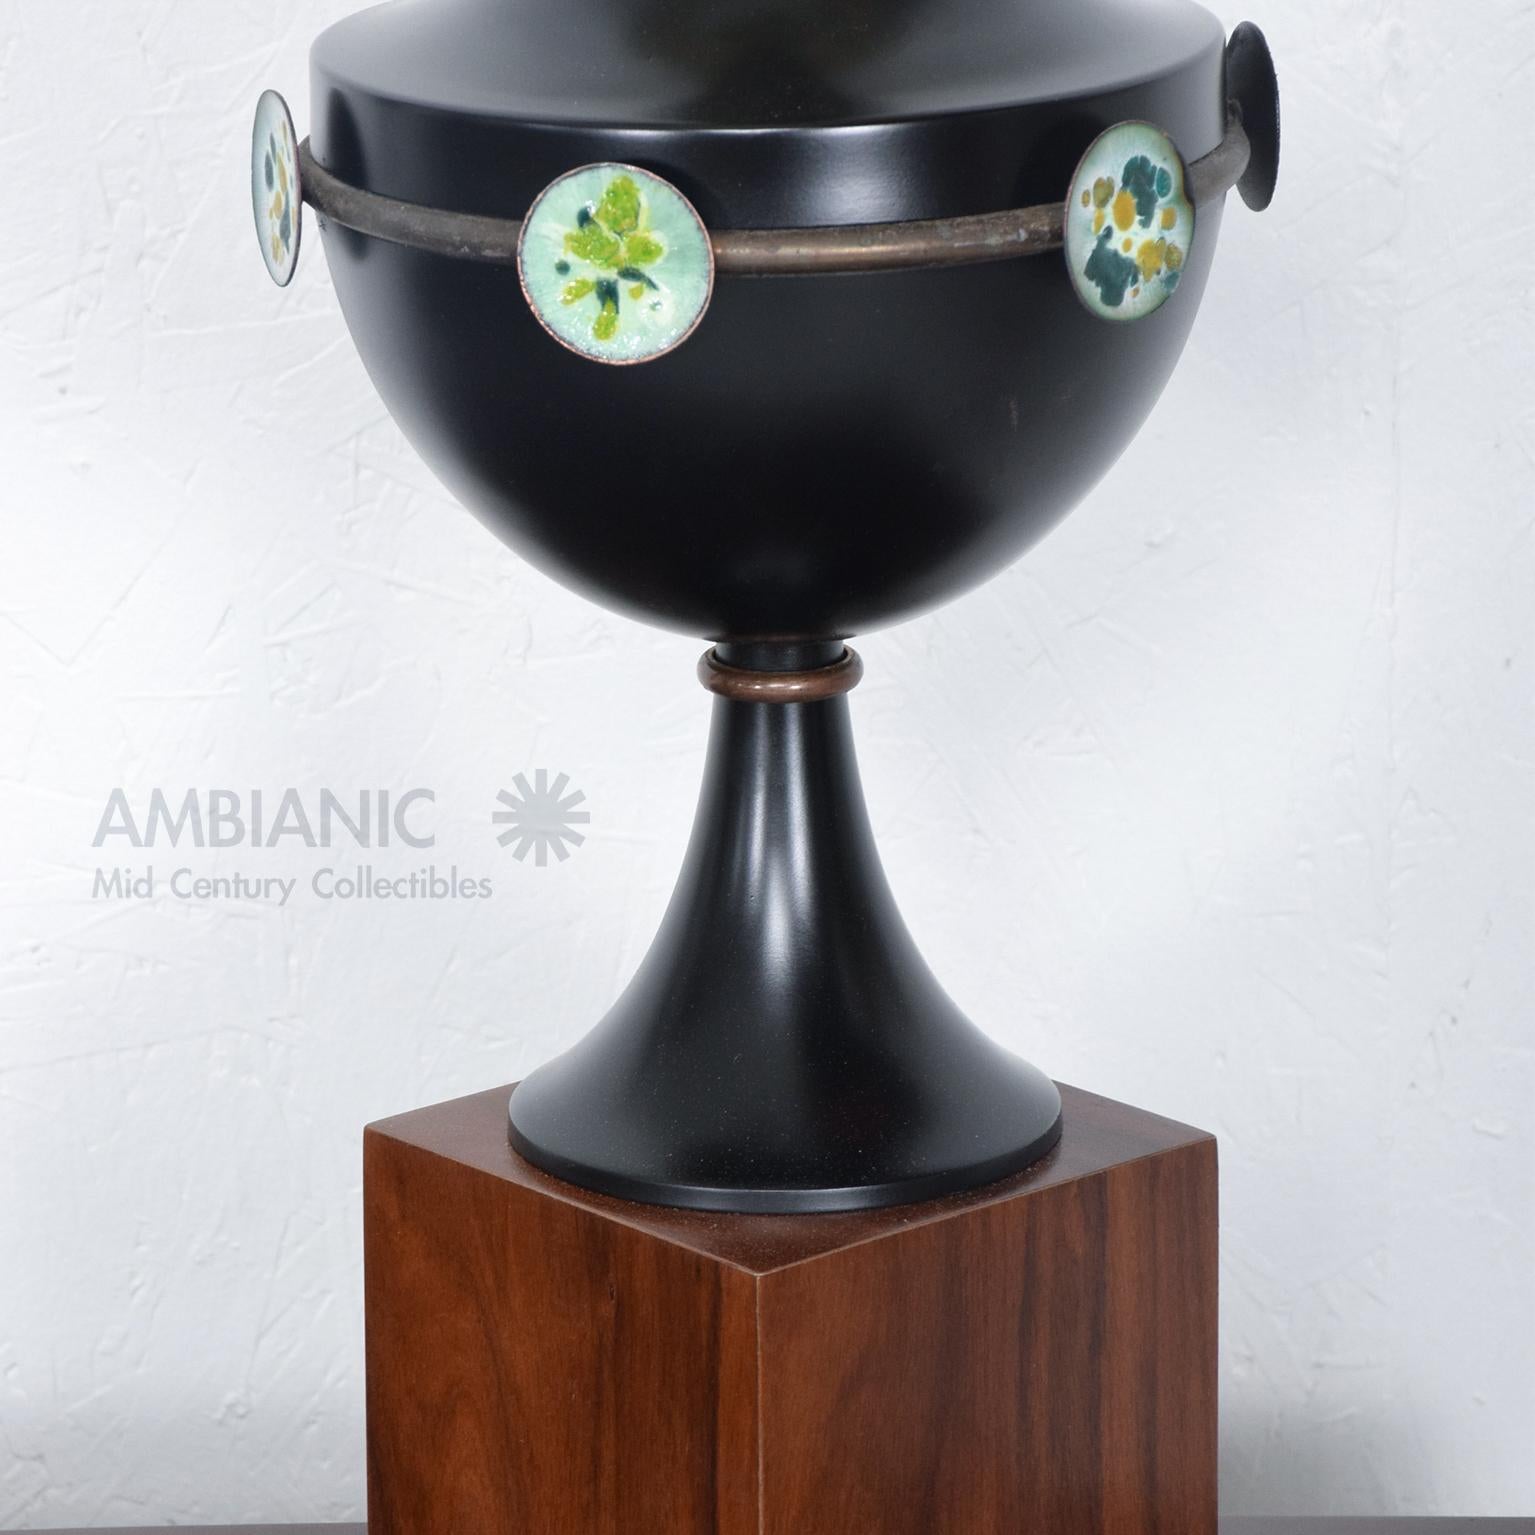 Mexican Modernism Fabulous Sculptural Table Lamp. Aluminum painted black. Fittings and hardware in patinated bronze.
Lamp features colorful enamel disc plates.  Lamp is mounted on elevated walnut rosewood base.
No information on maker. Similar to